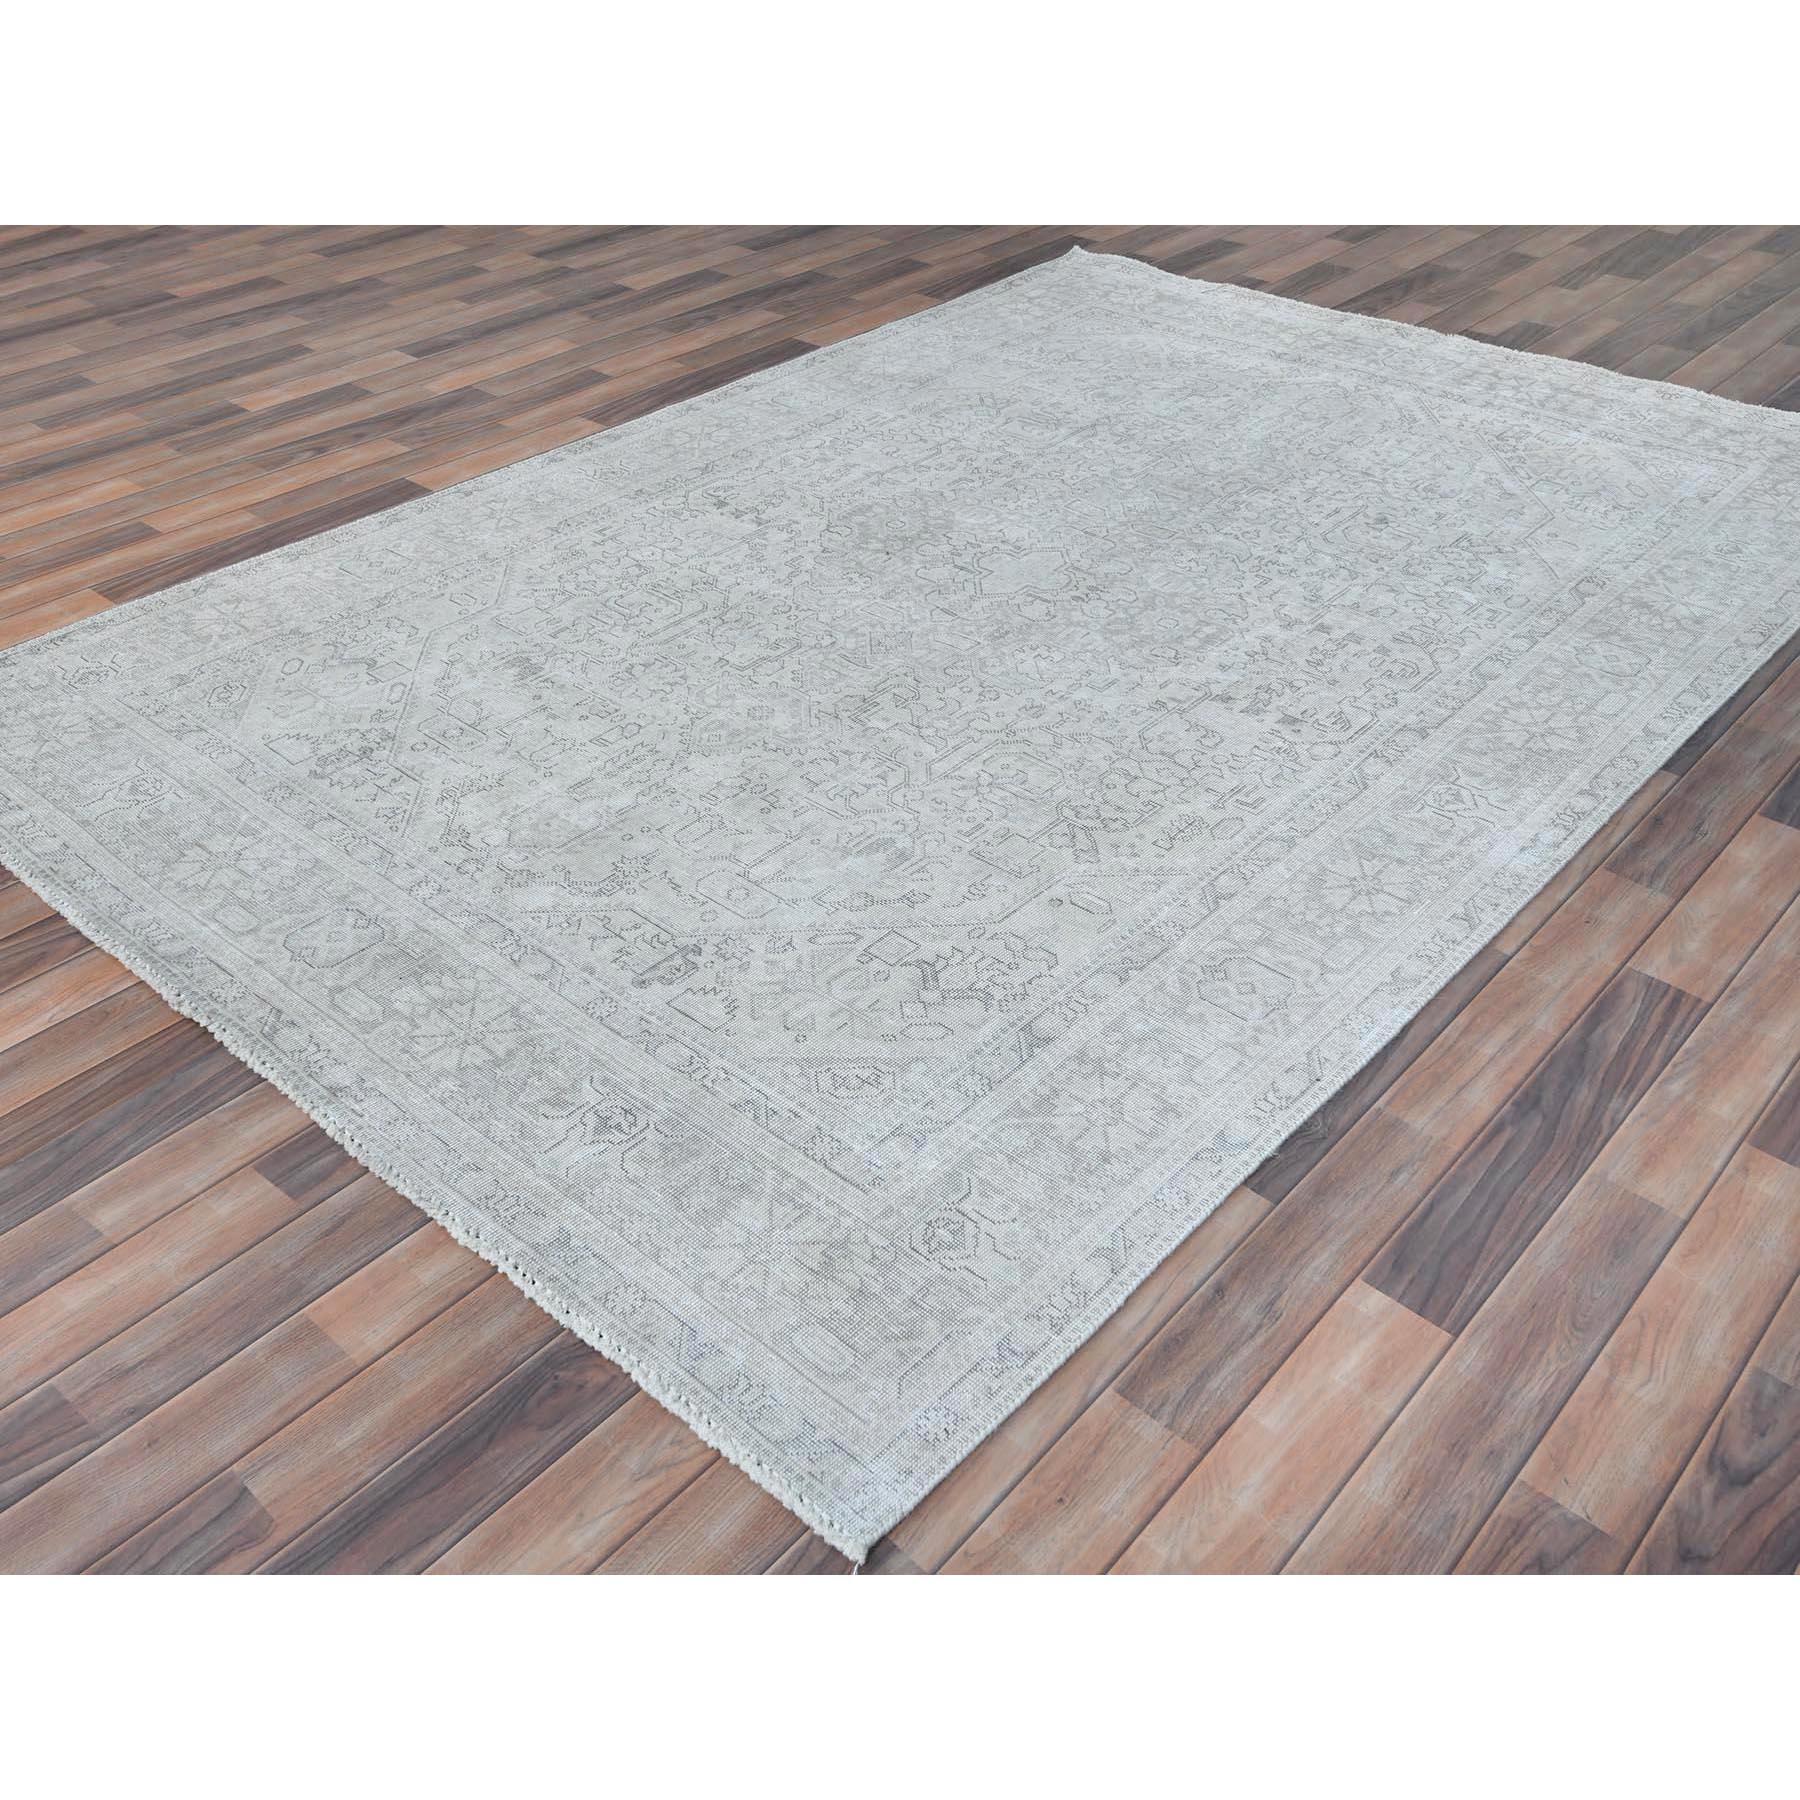 Grey Vintage Persian Tabriz Hand Knotted Worn Wool Distressed Shabby Chic Rug In Good Condition For Sale In Carlstadt, NJ